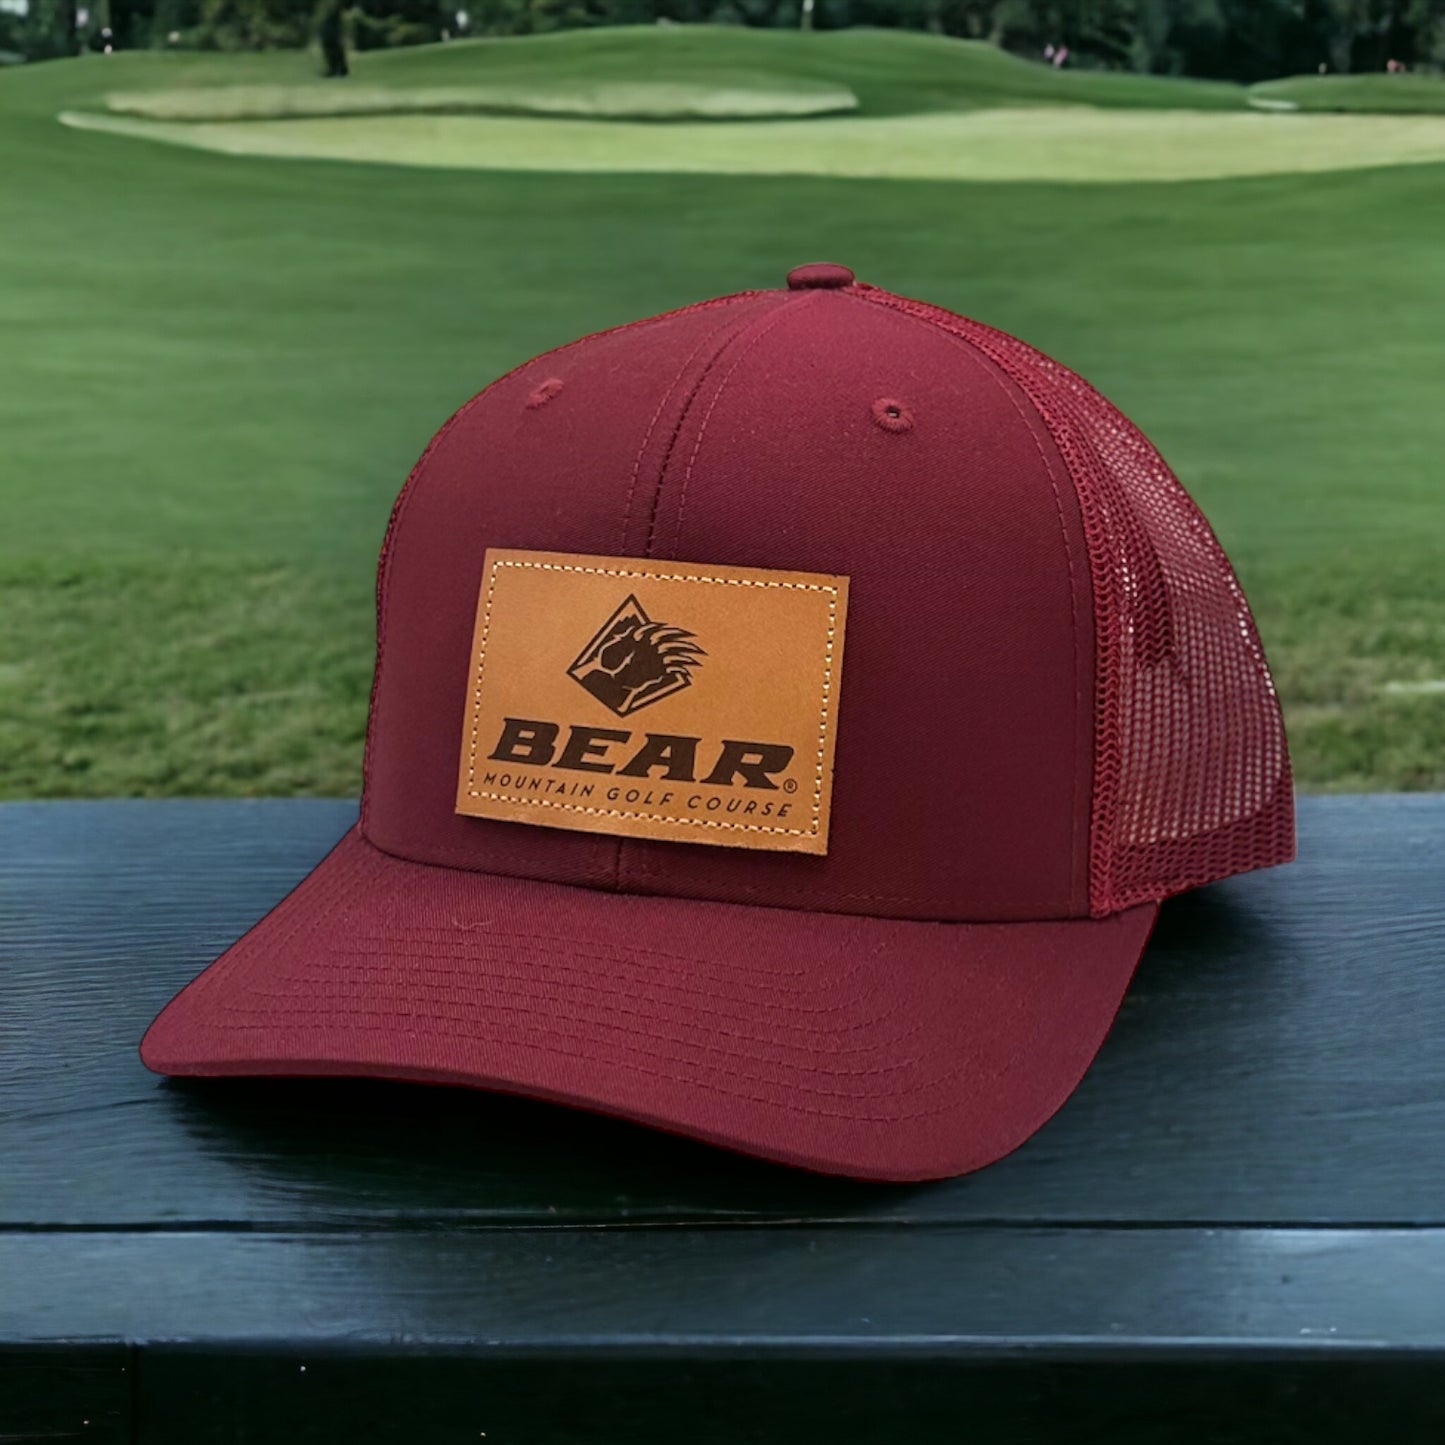 Cardinal trucker had with bear mountain logo on a leather patch on the front